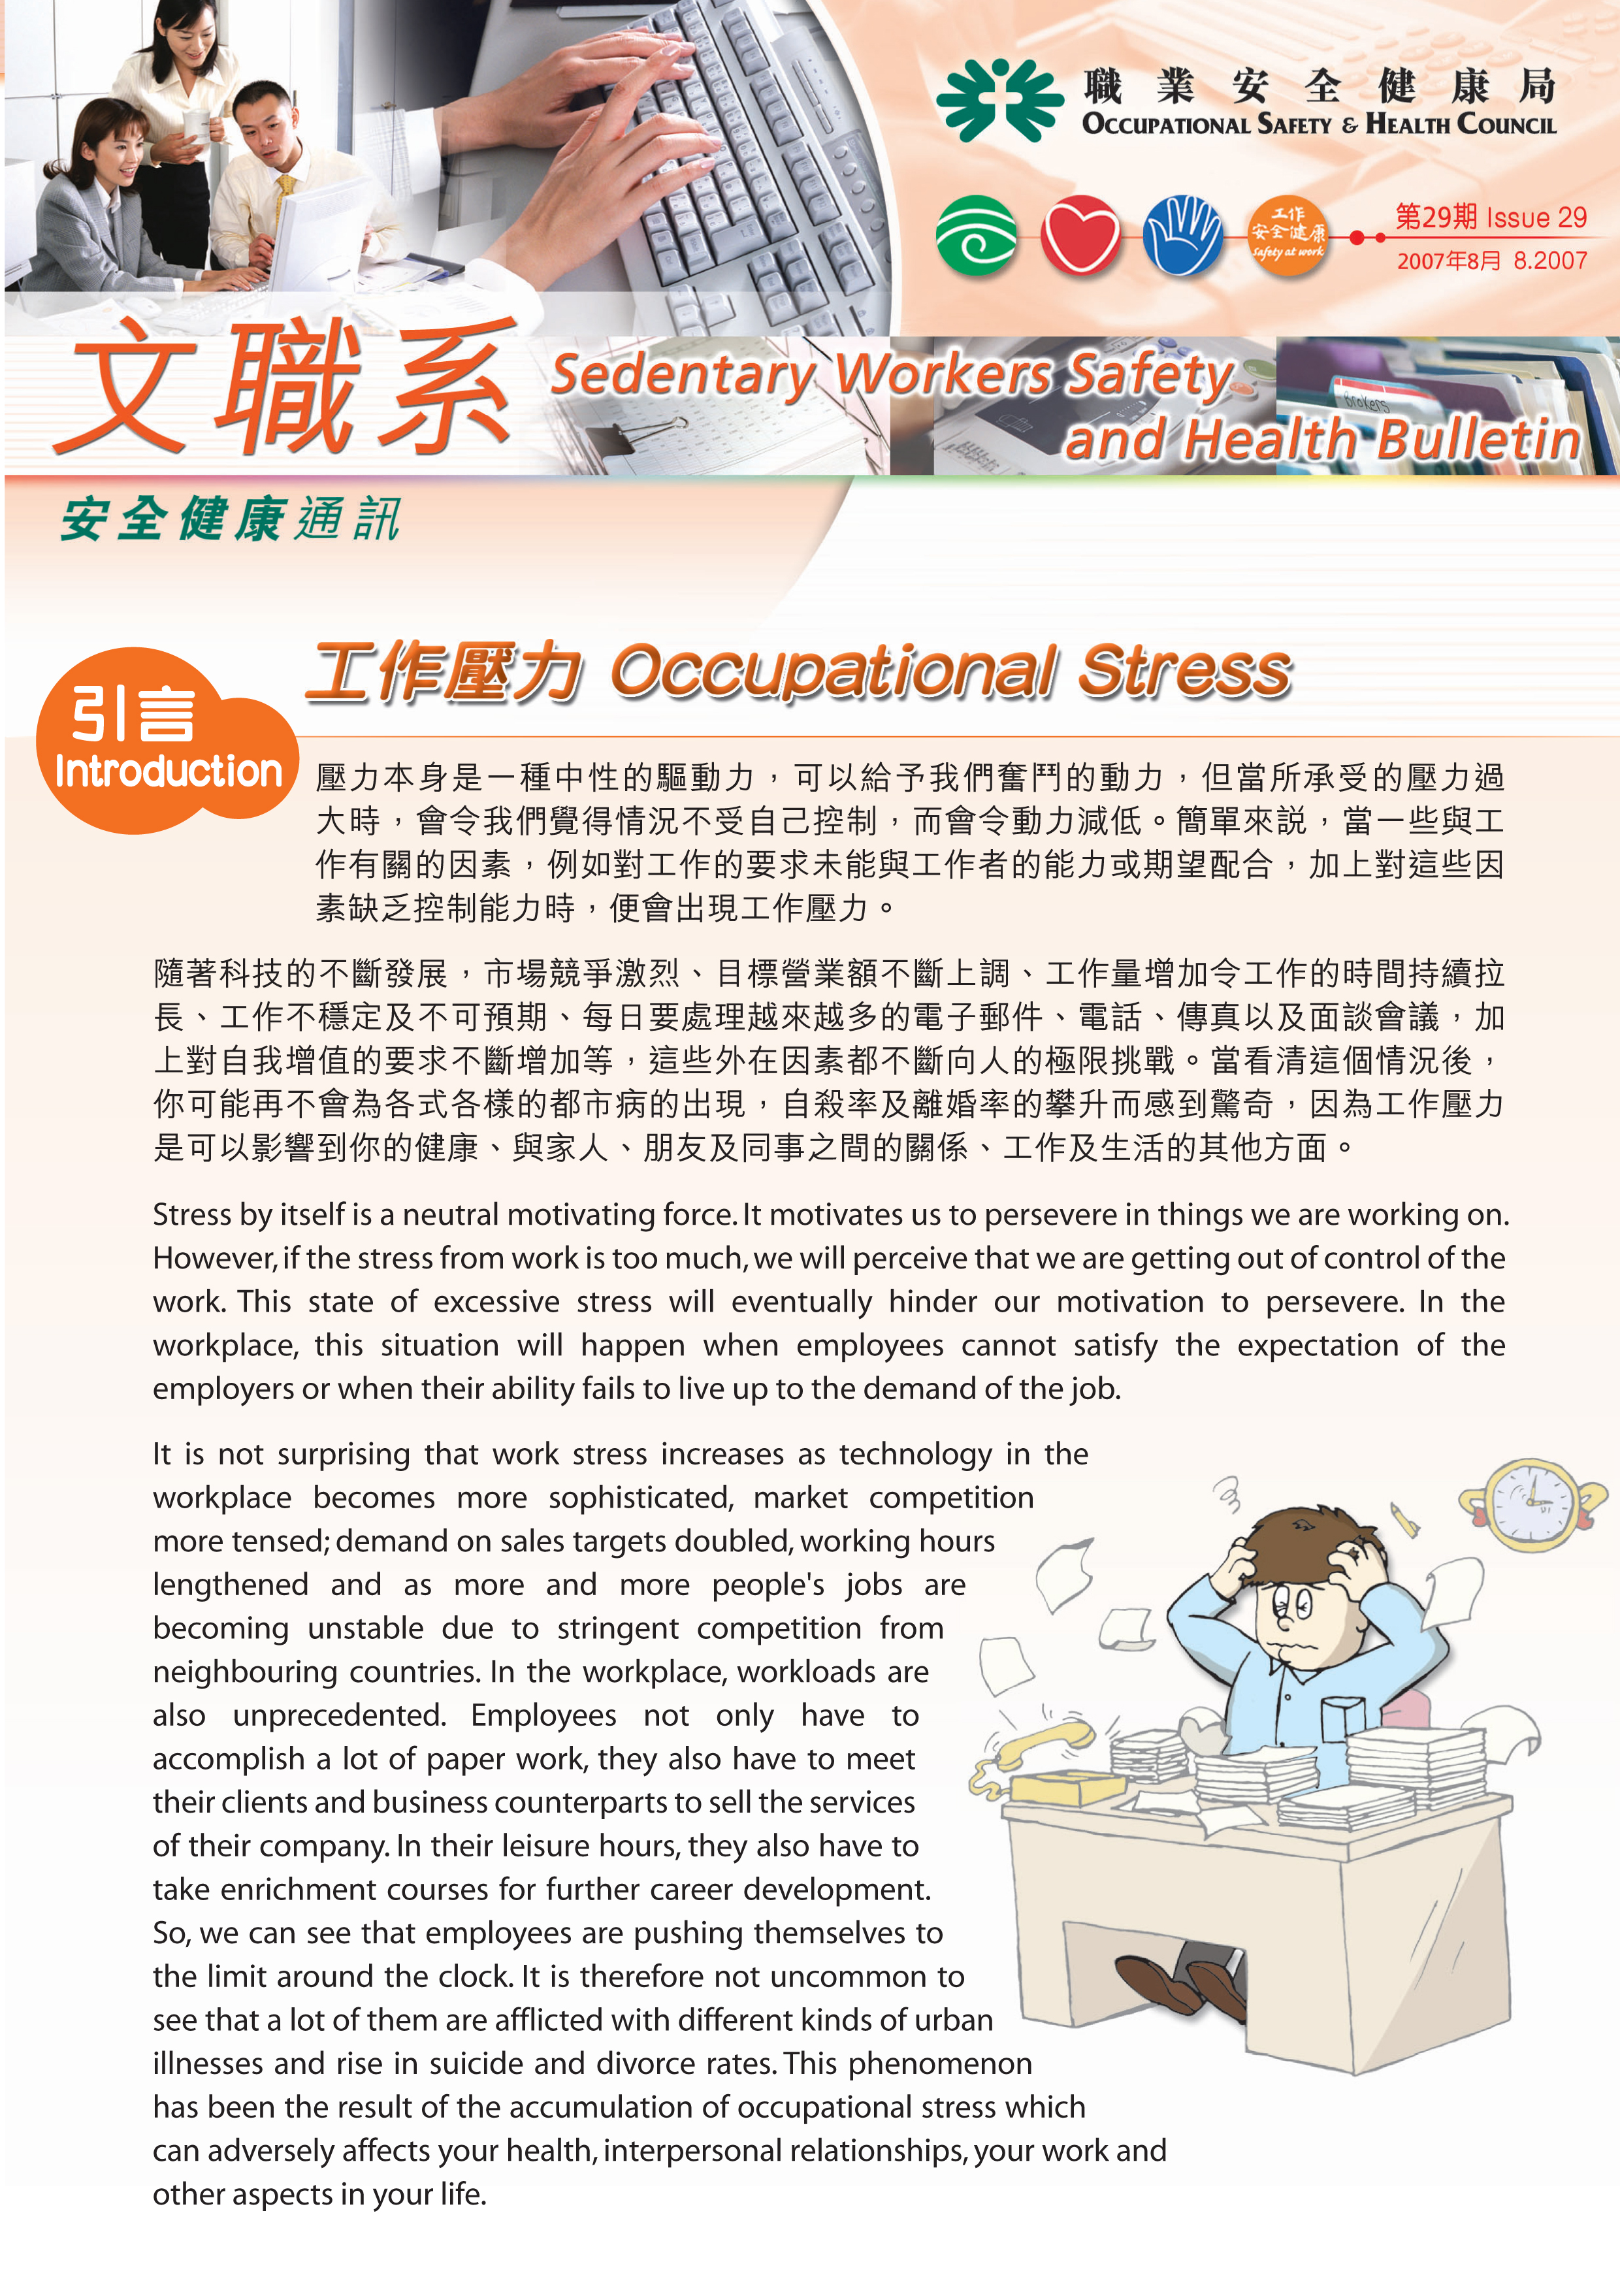 Safety and Health Bulletin: Occupational Stress (published by OSHC)